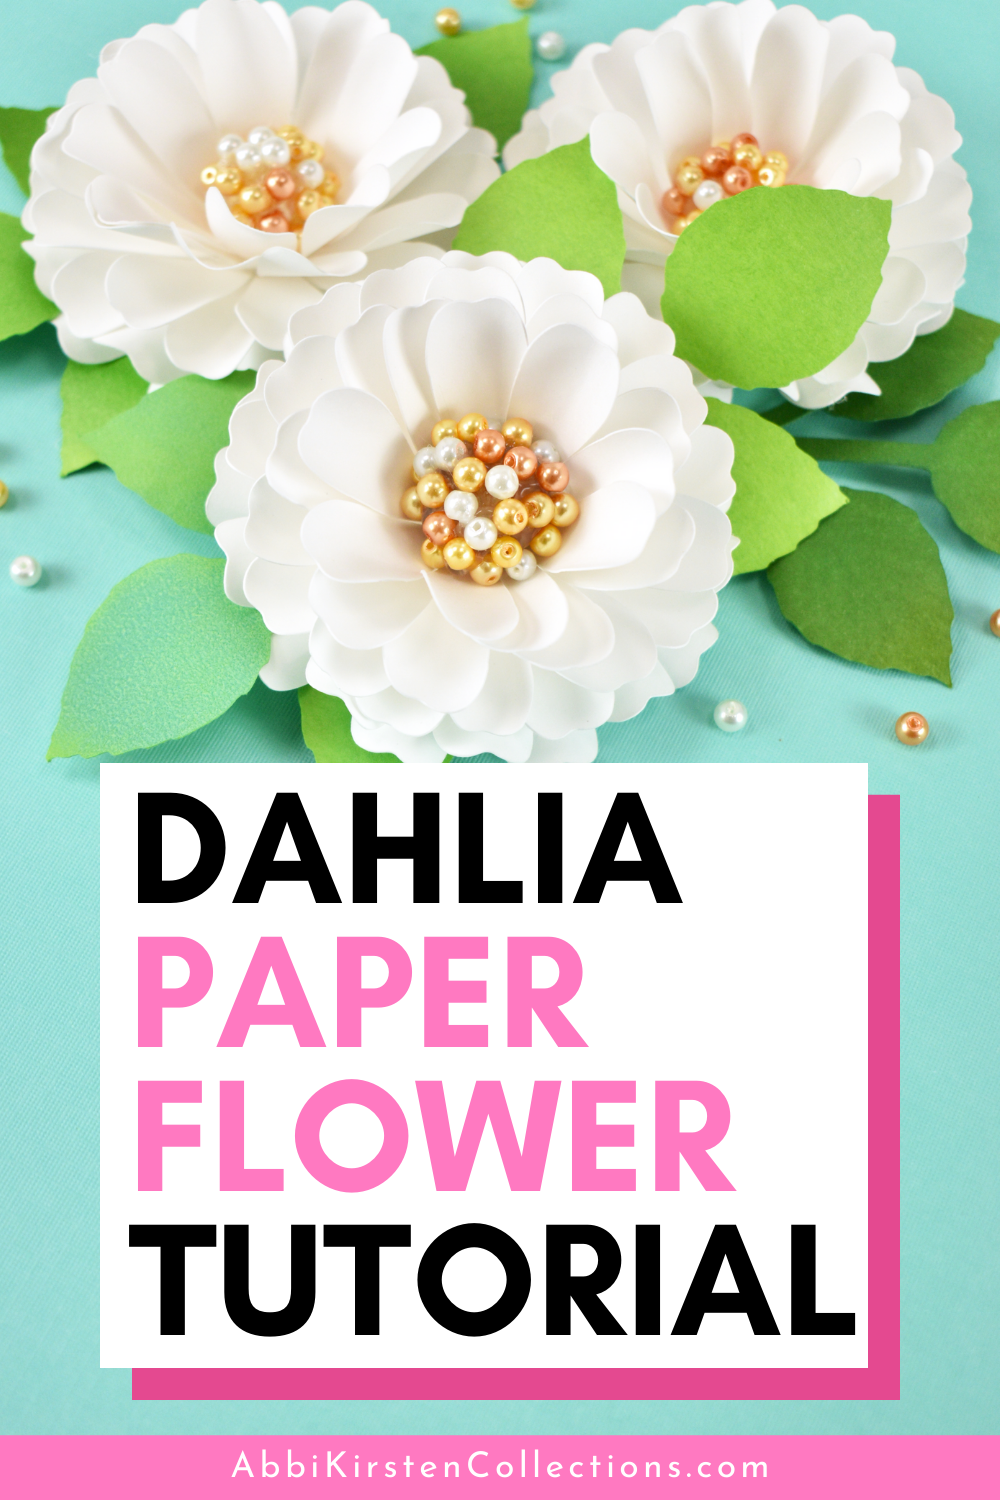 Three white paper dahlia flowers with gold and white pearl centers and green leaves sit on a teal blue background. Text on the image says "dahlia paper flower tutorial"